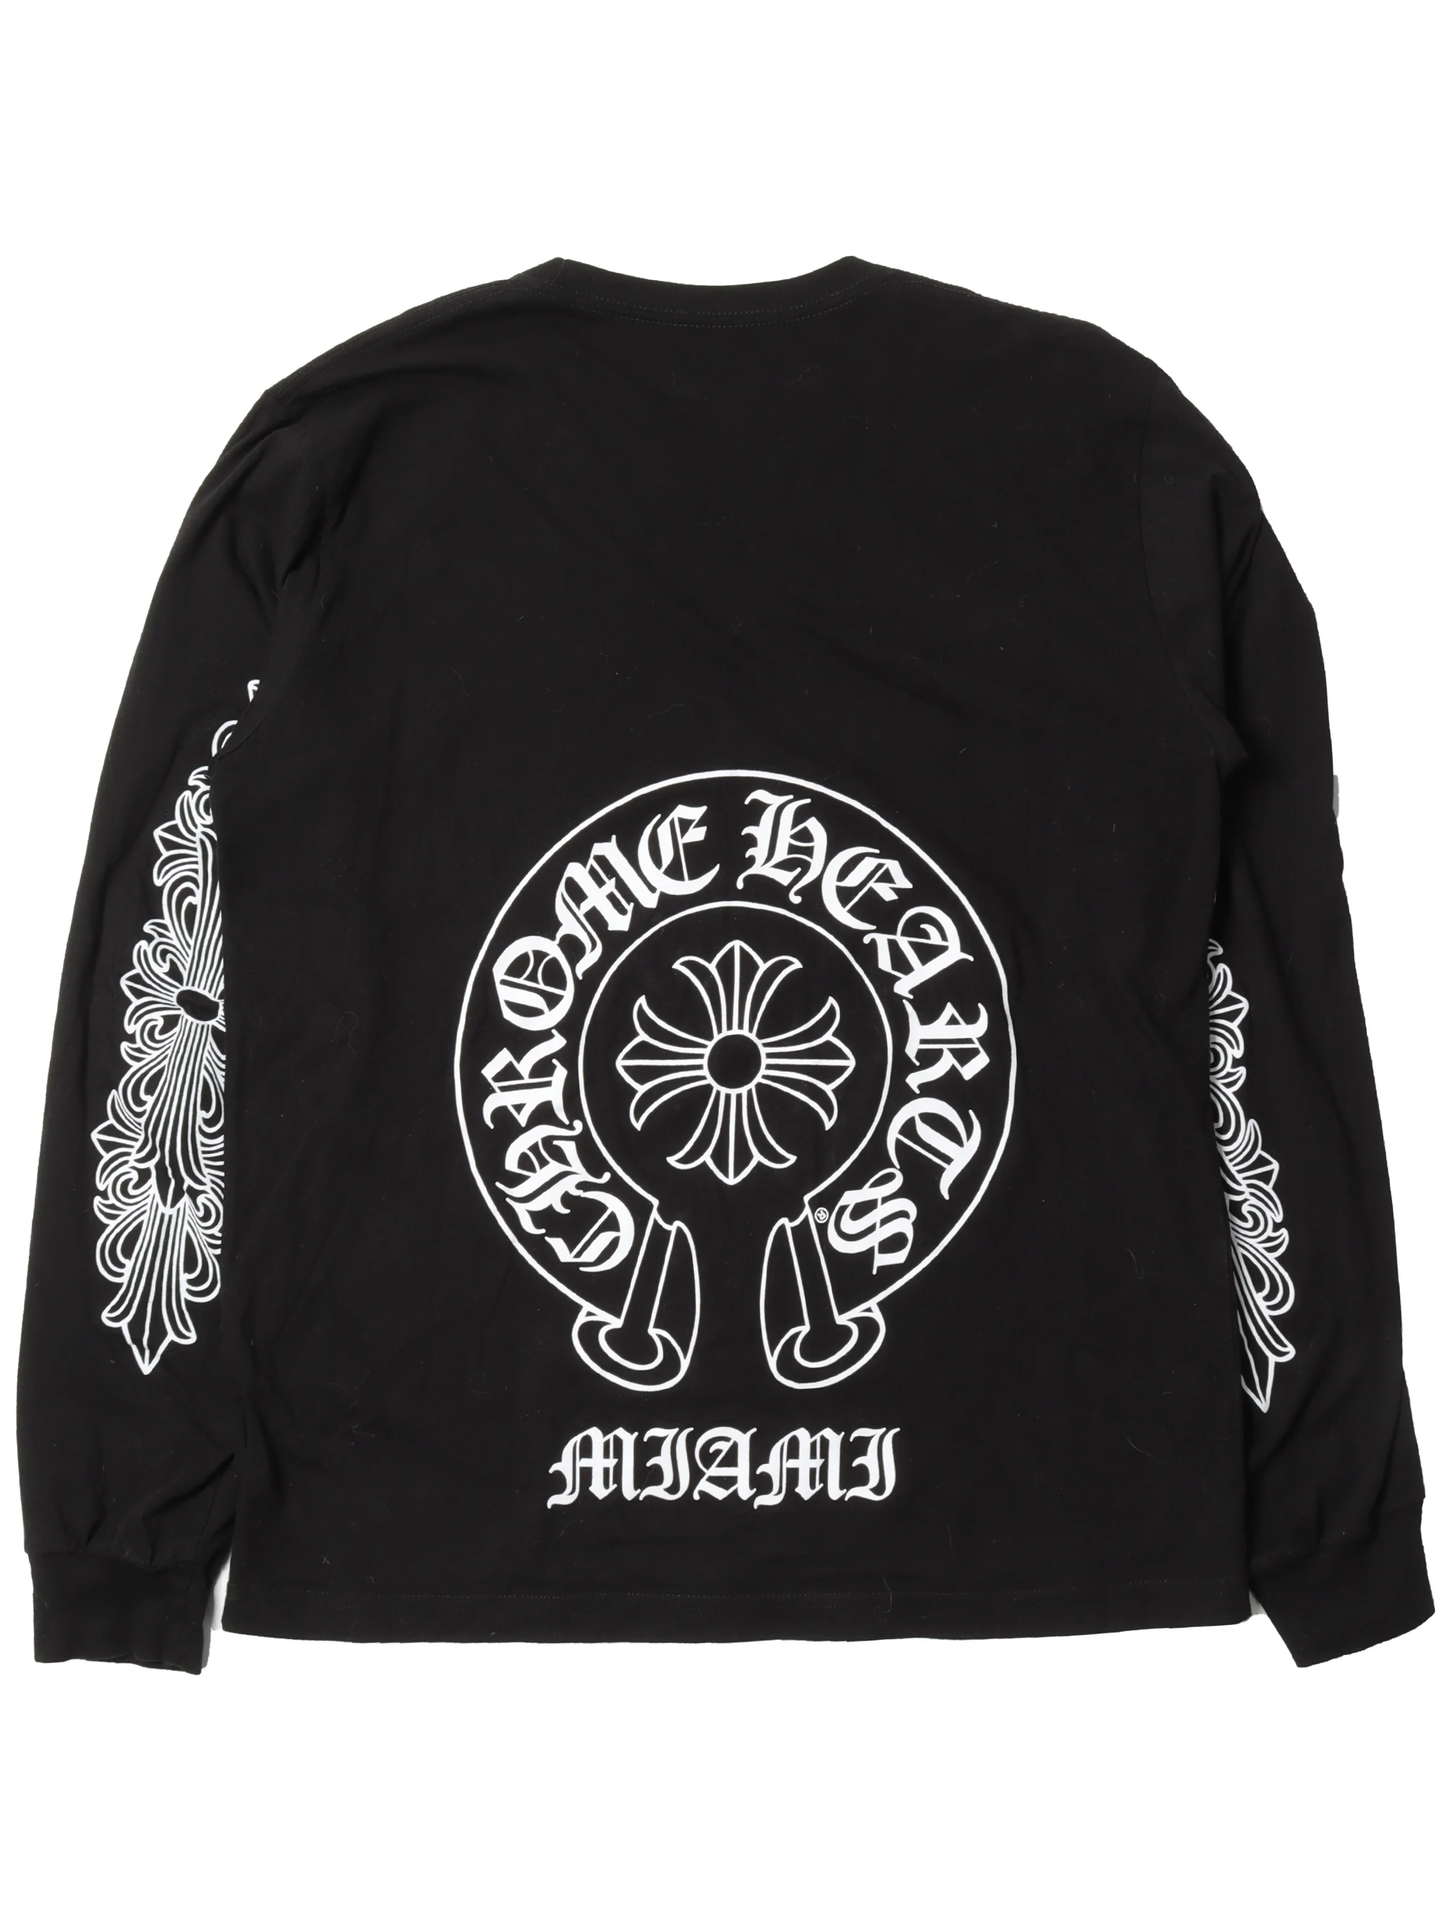 Chrome Hearts Miami Edition Horseshoe Logo with Floral Sleeve LS Tee Black